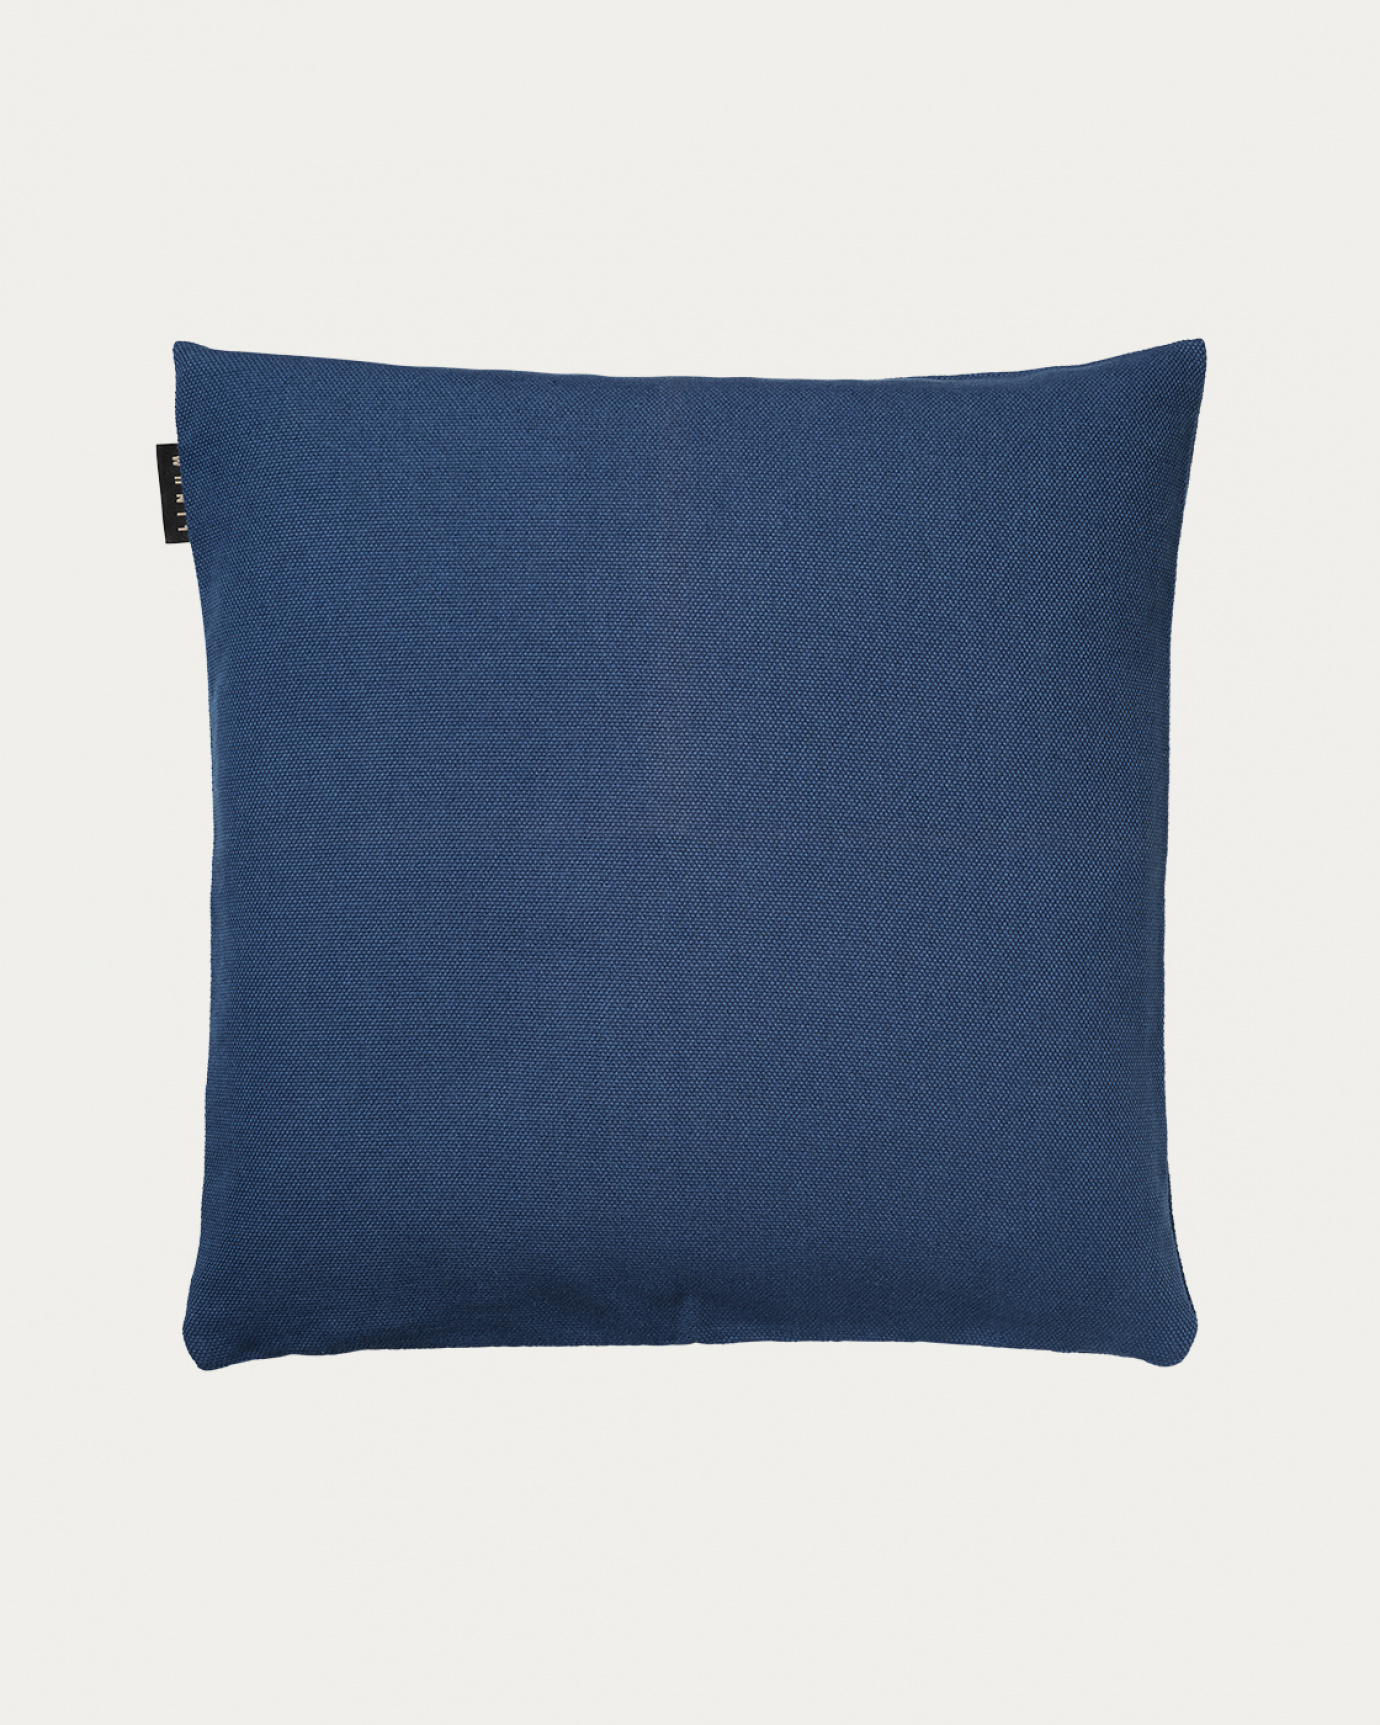 Product image indigo blue PEPPER cushion cover made of soft cotton from LINUM DESIGN. Easy to wash and durable for generations. Size 50x50 cm.